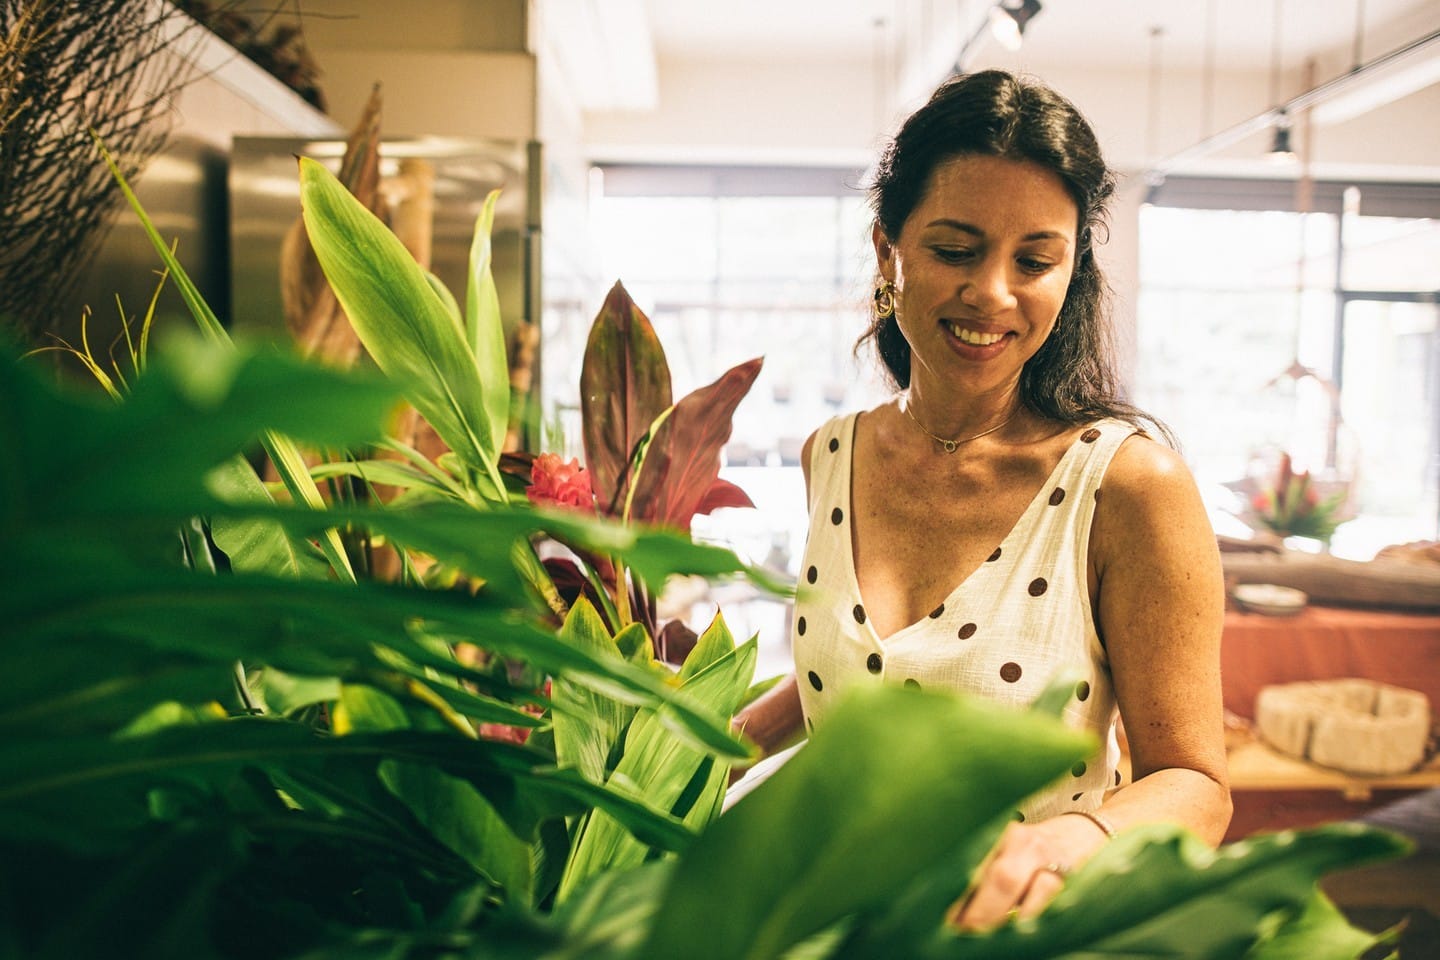 Celebrate all things spring at Bloom! Garden + Art Festival returning to East Village Shops and Ward Centre on Friday &amp; Sunday, April 7 &amp; 8. Browse and buy local plants, pottery, orchids, handmade items, and learn something new at complimentary workshops.